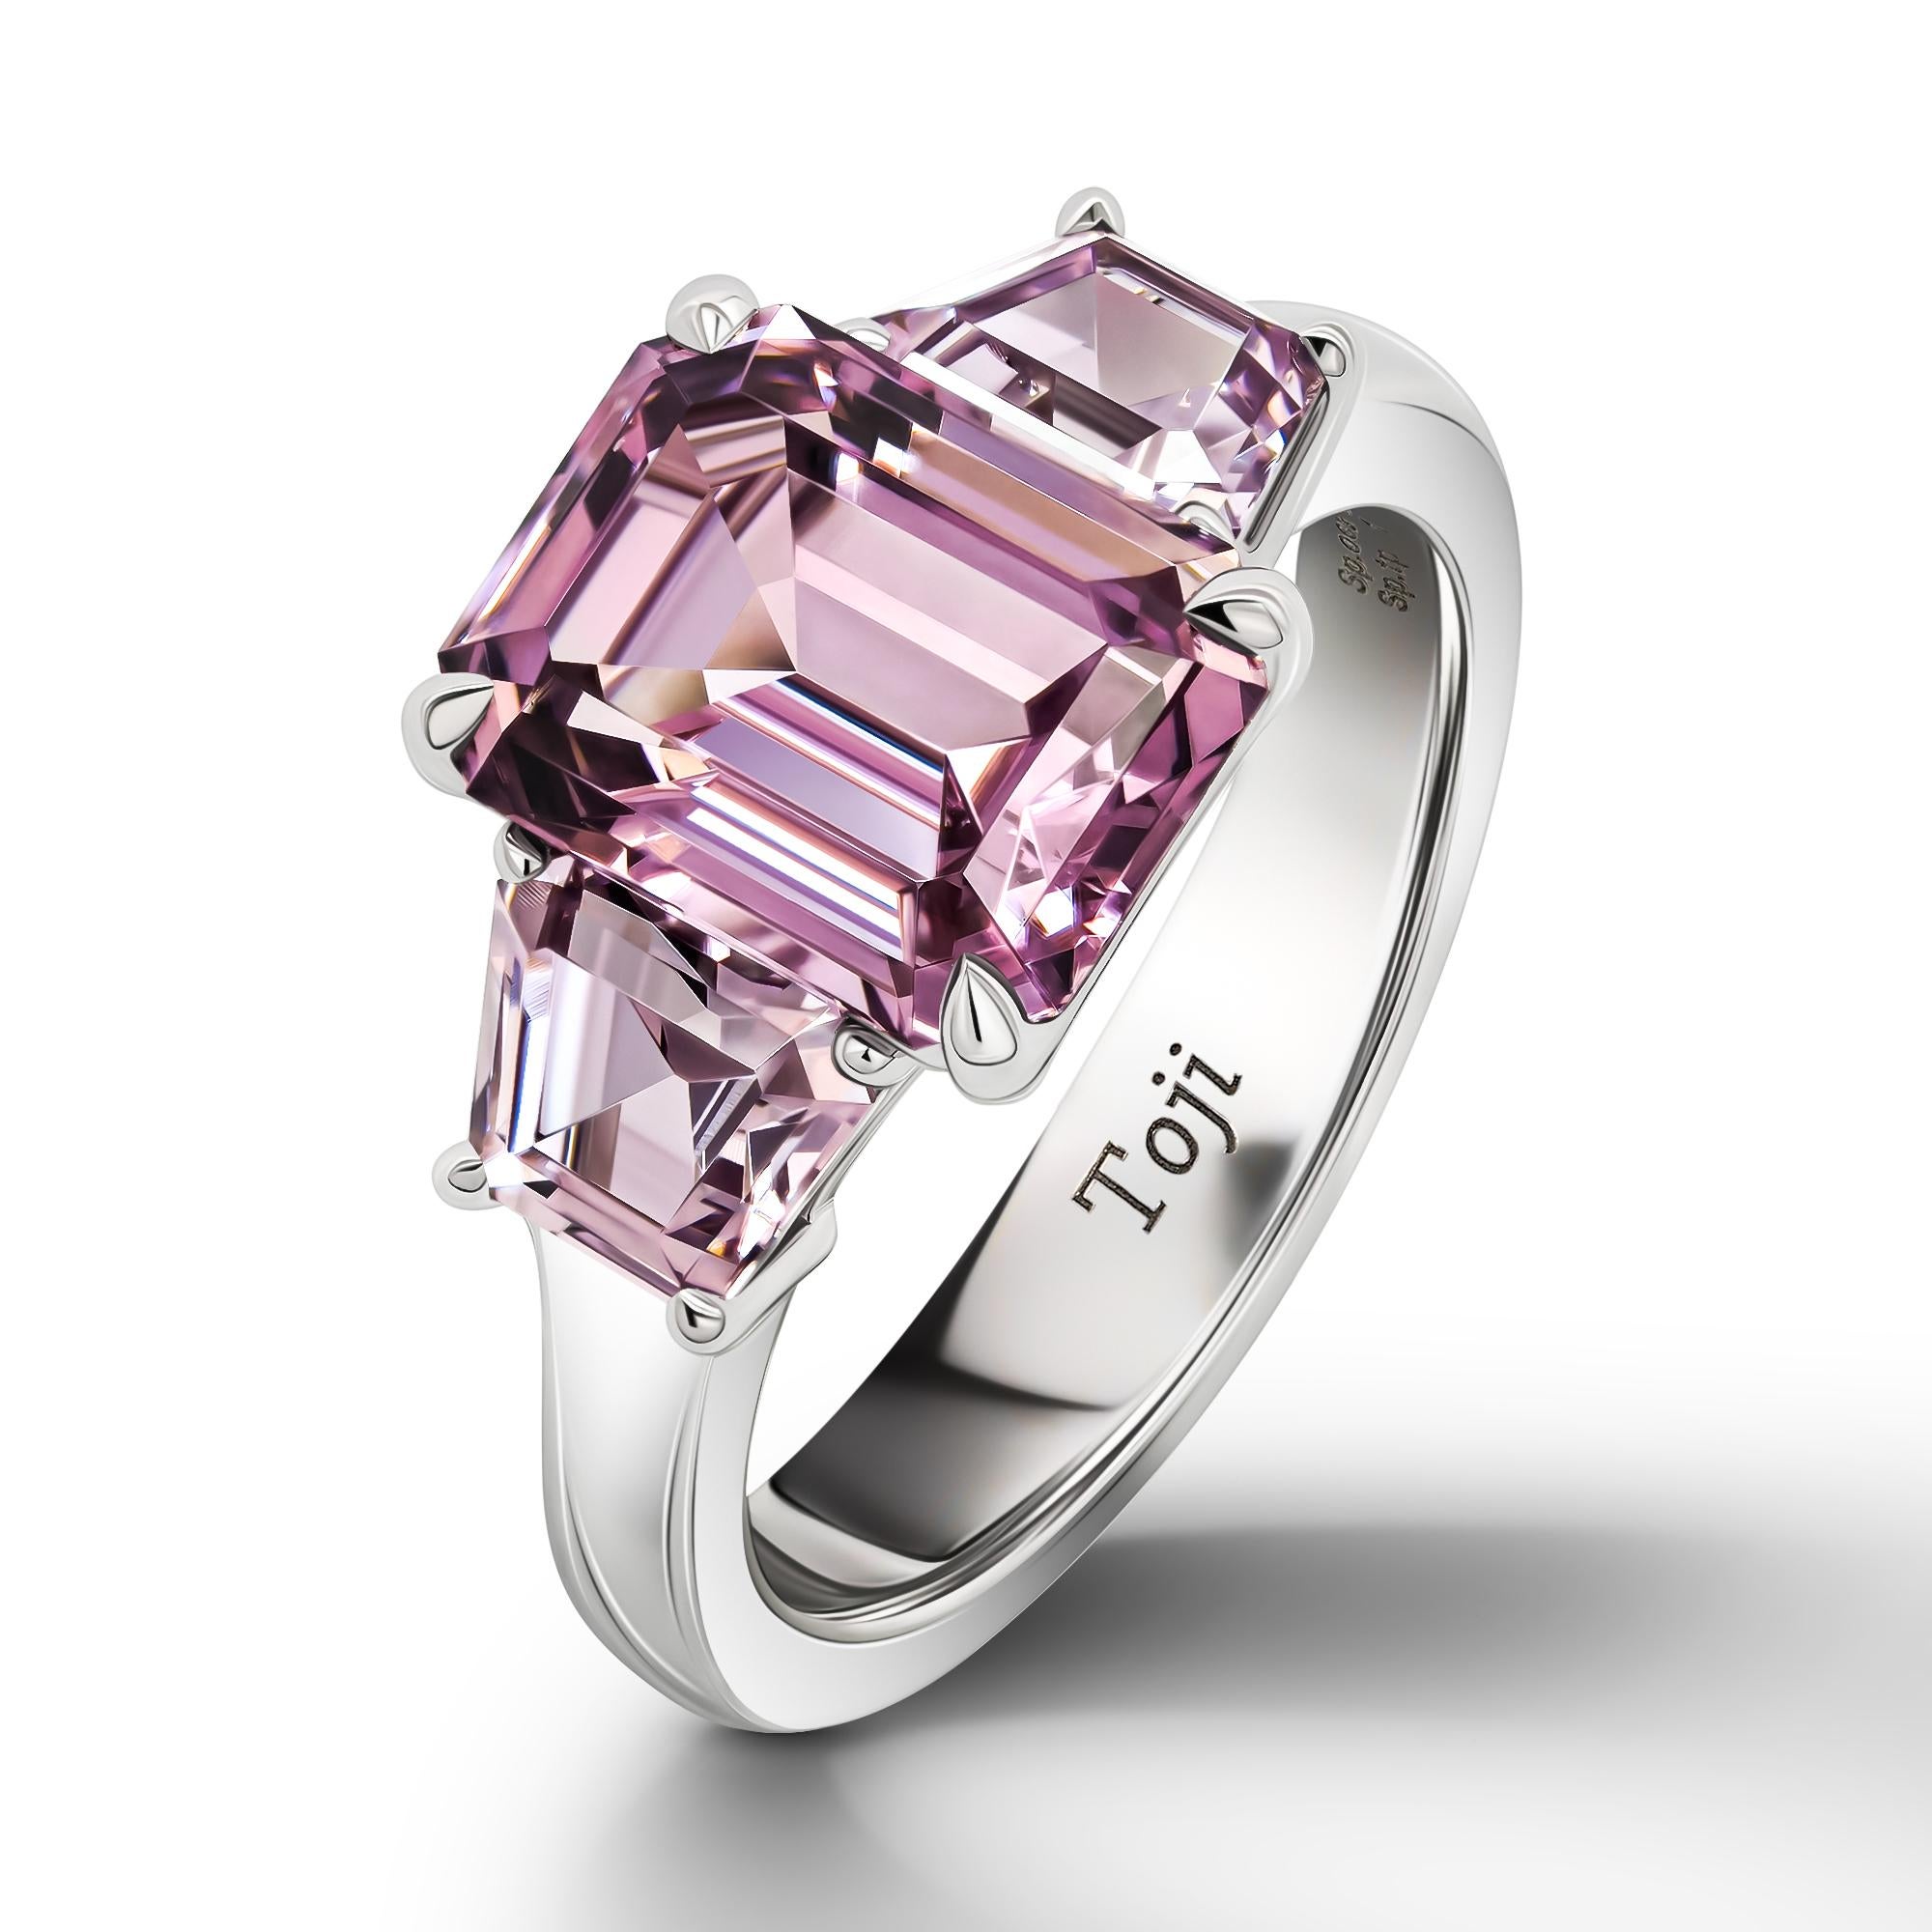 •	18k White Gold.
•	Lavender Spinels in emerald cut – total carat weight 3.27. 
•	Lavender Spinels in trapezium cut – 2 pc total carat weight 1.31.
•	Ring Size – 5.
•	Product weight –4.99 grams. 
